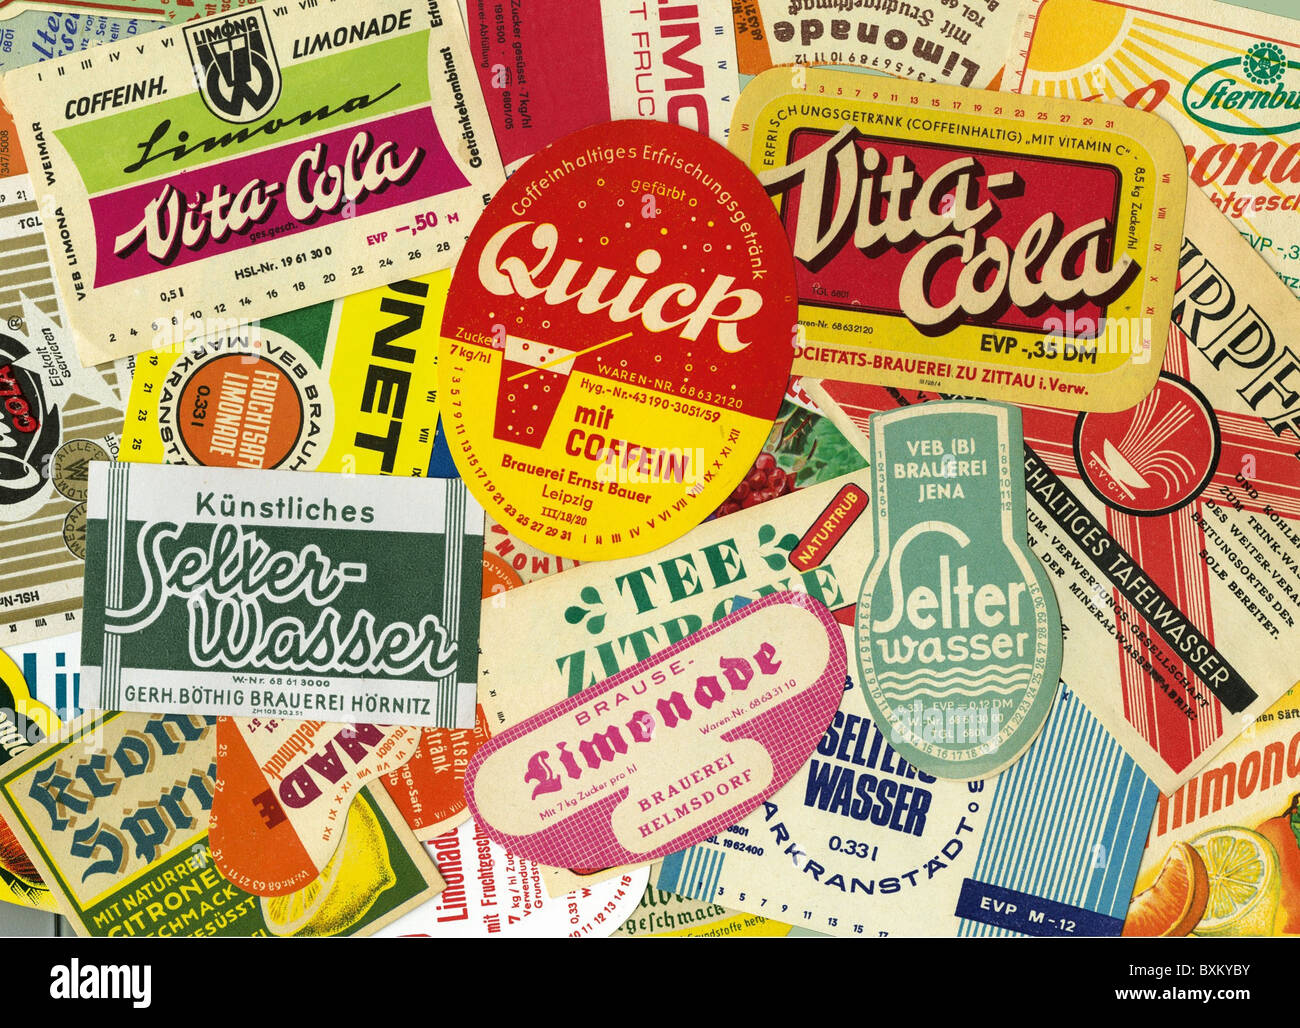 beverages, labels from GDR beverages, symbol image, Additional-Rights-Clearences-Not Available Stock Photo